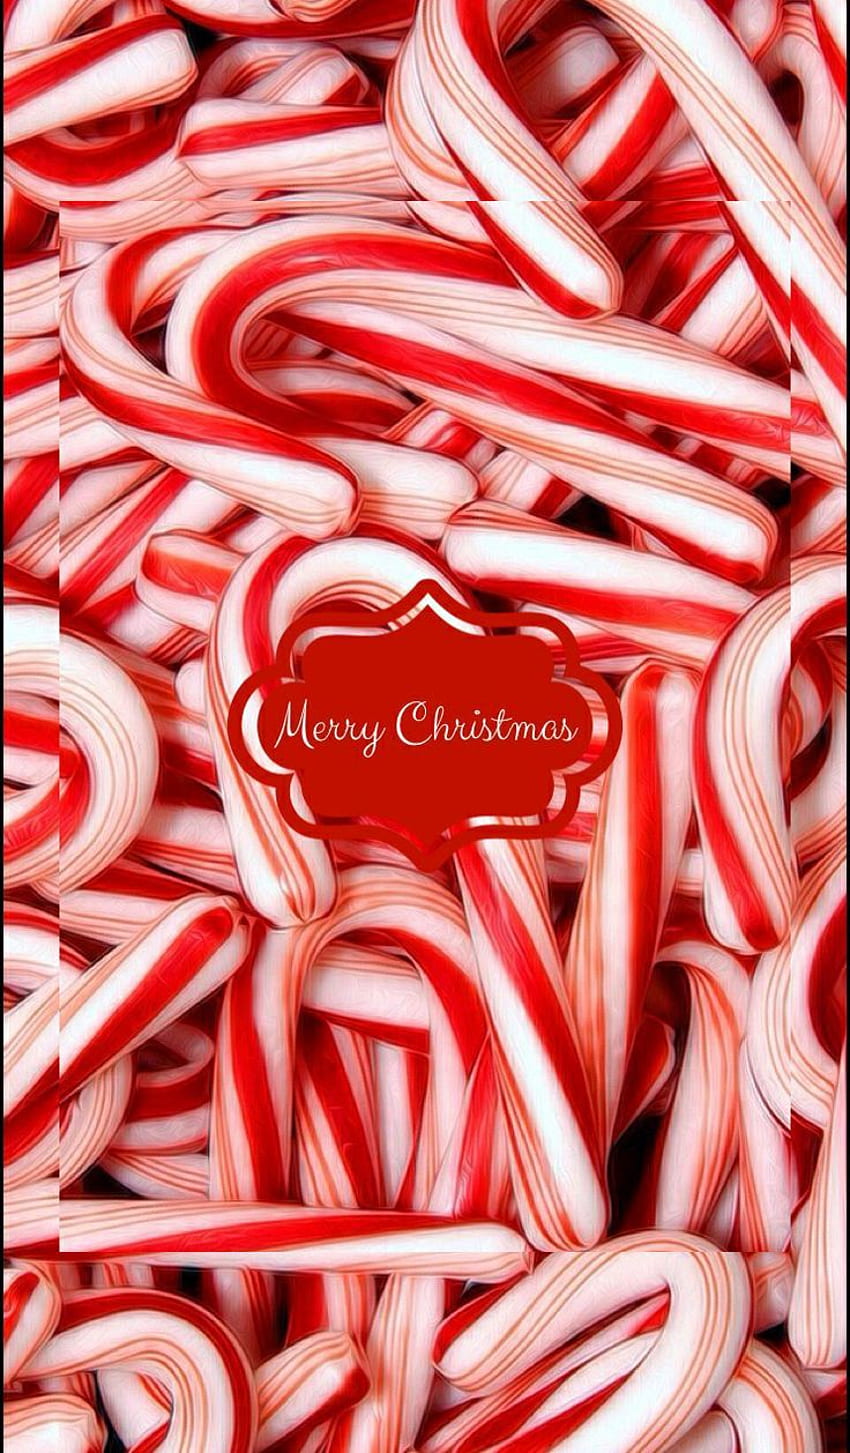 A pile of candy canes with a Merry Christmas sign in the middle. - Candy cane